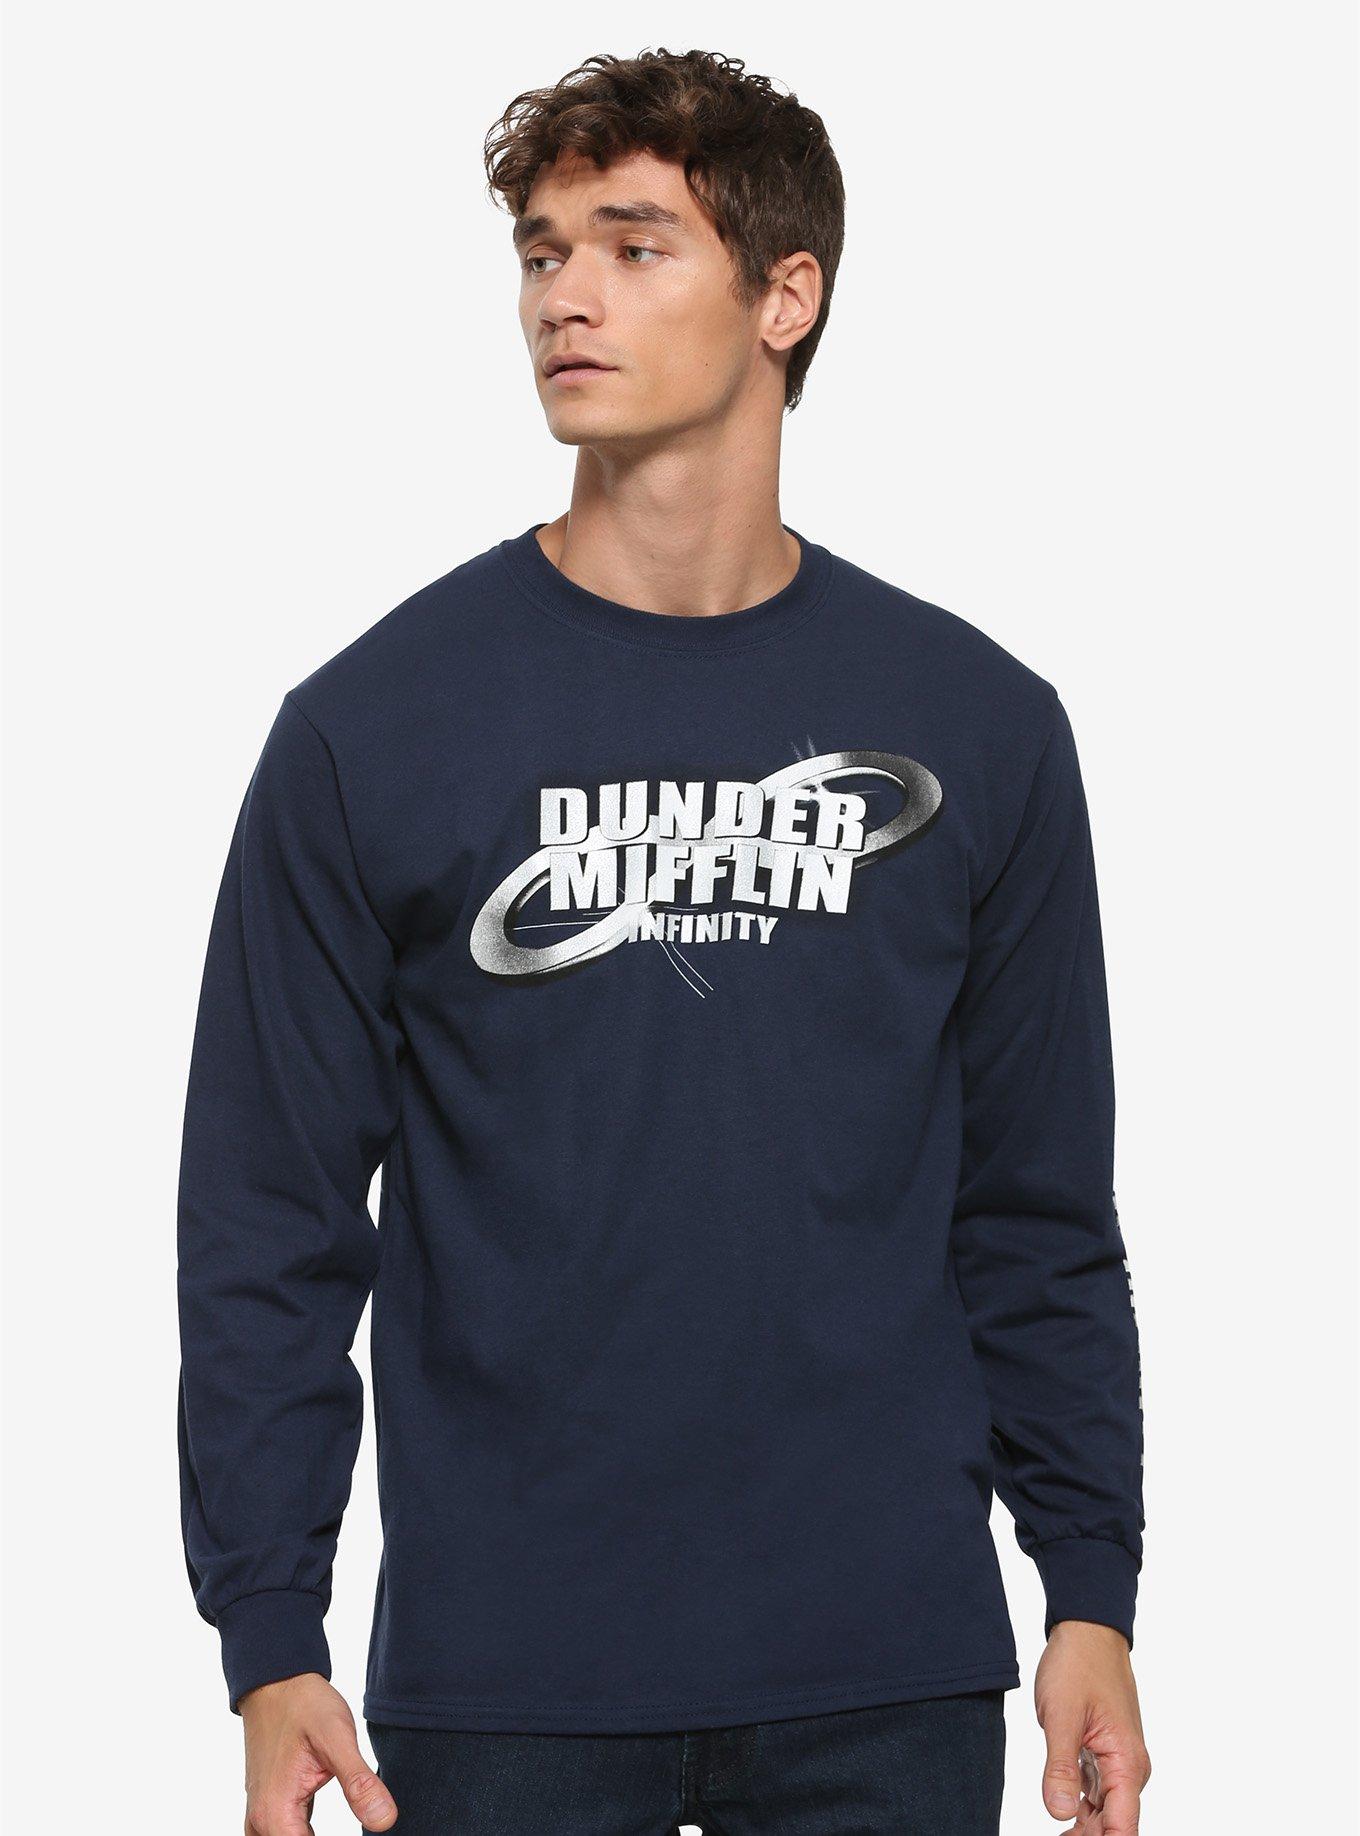 The Office Dunder Mifflin Infinity Long Sleeve T-Shirt - BoxLunch Exclusive, BLUE, hi-res